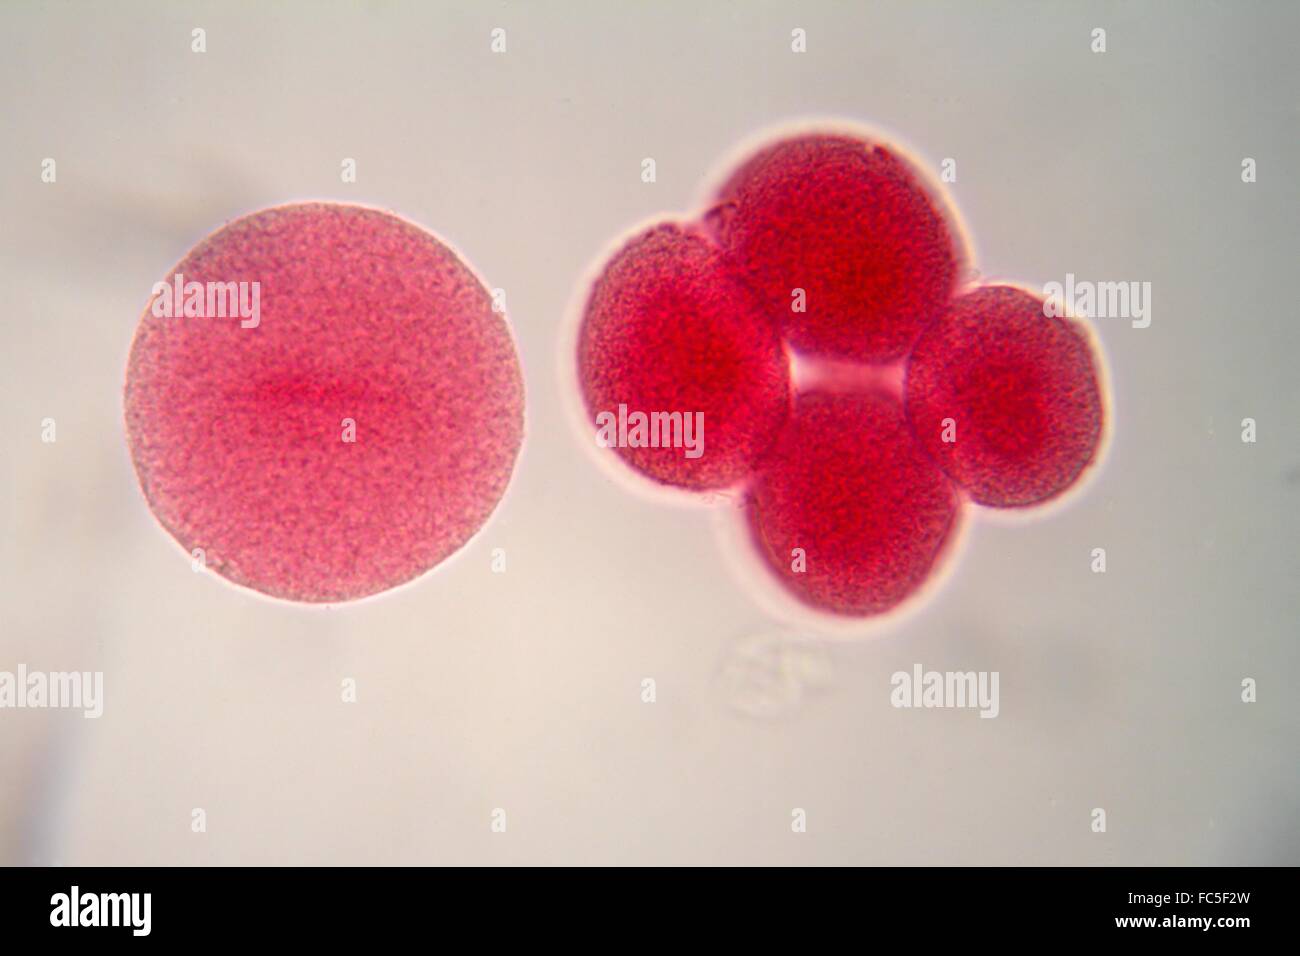 Egg cells under the microscope Stock Photo